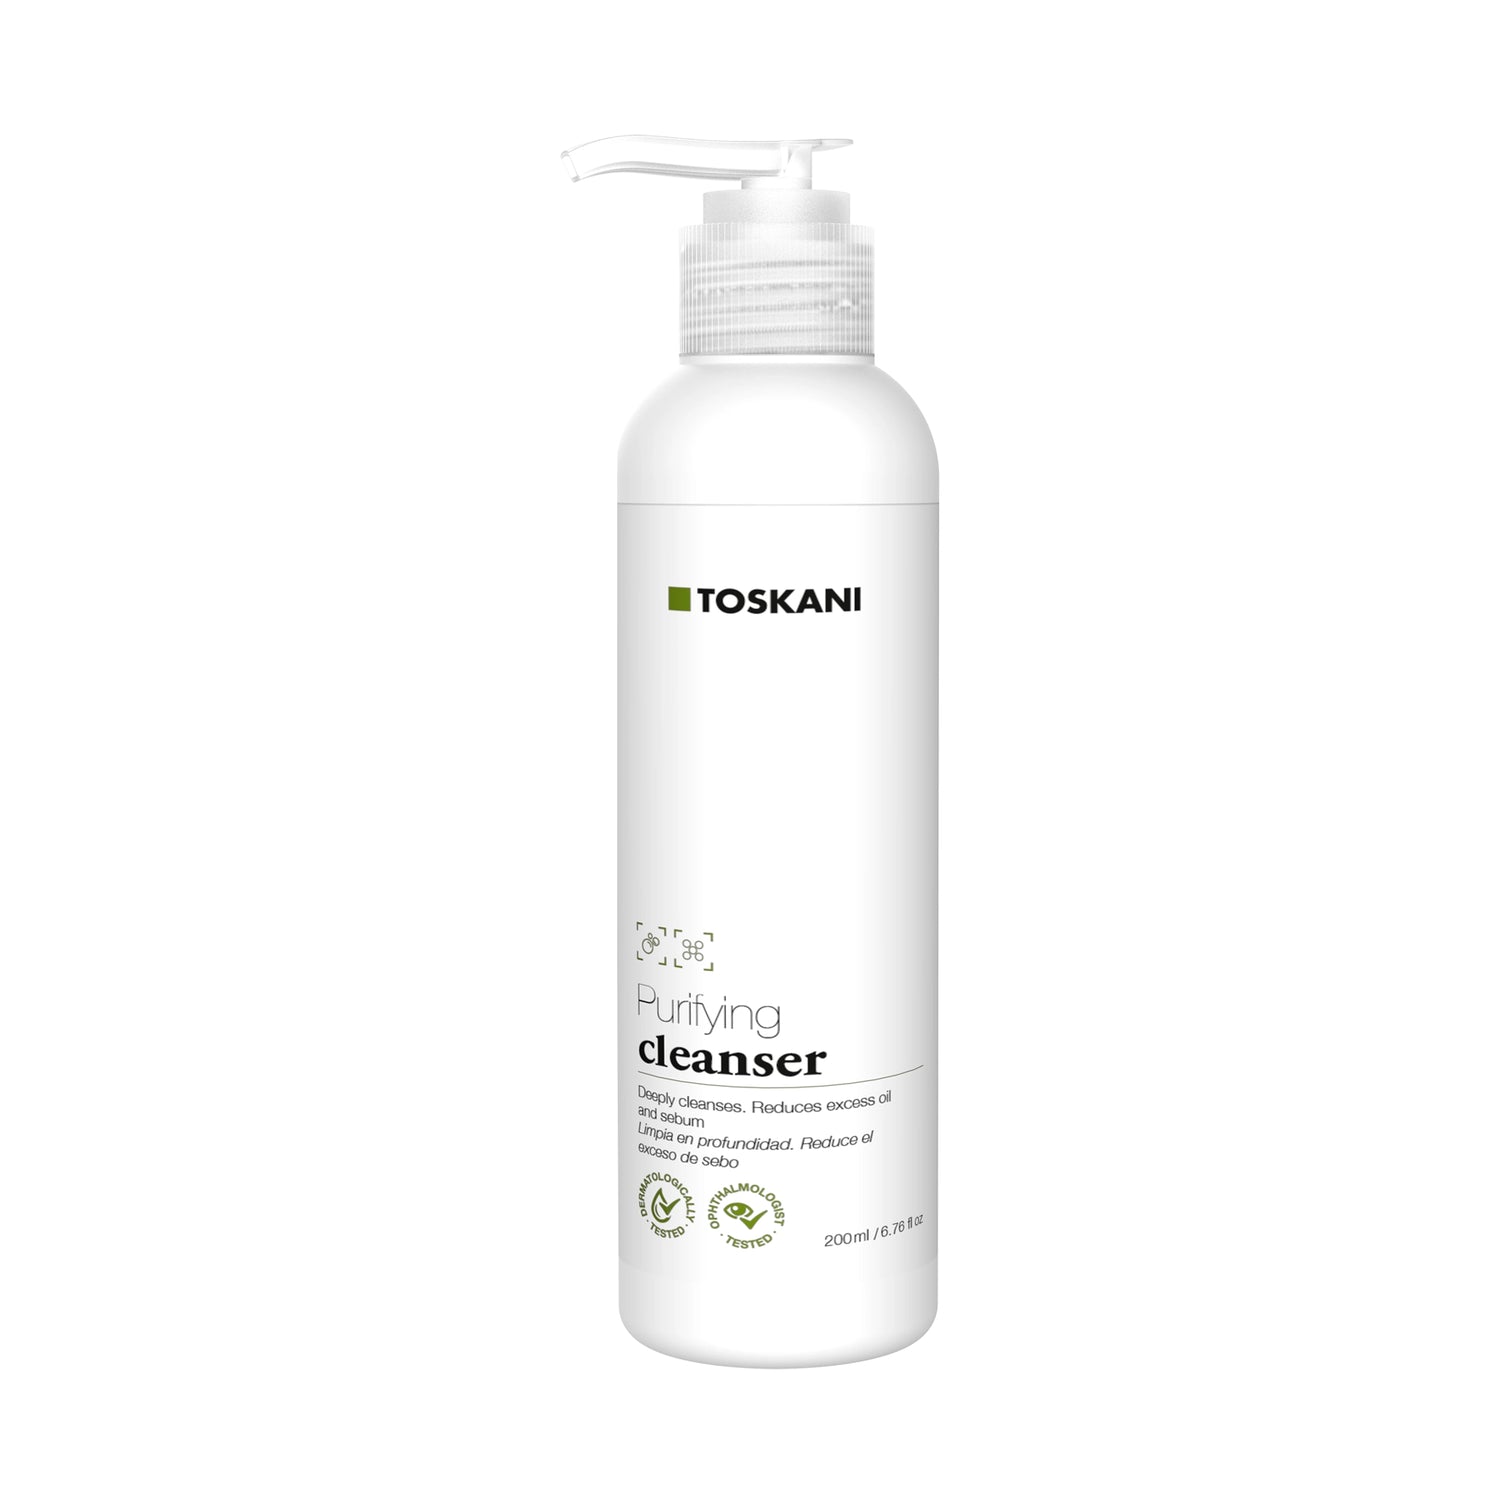 Toskani - Purifying cleanser